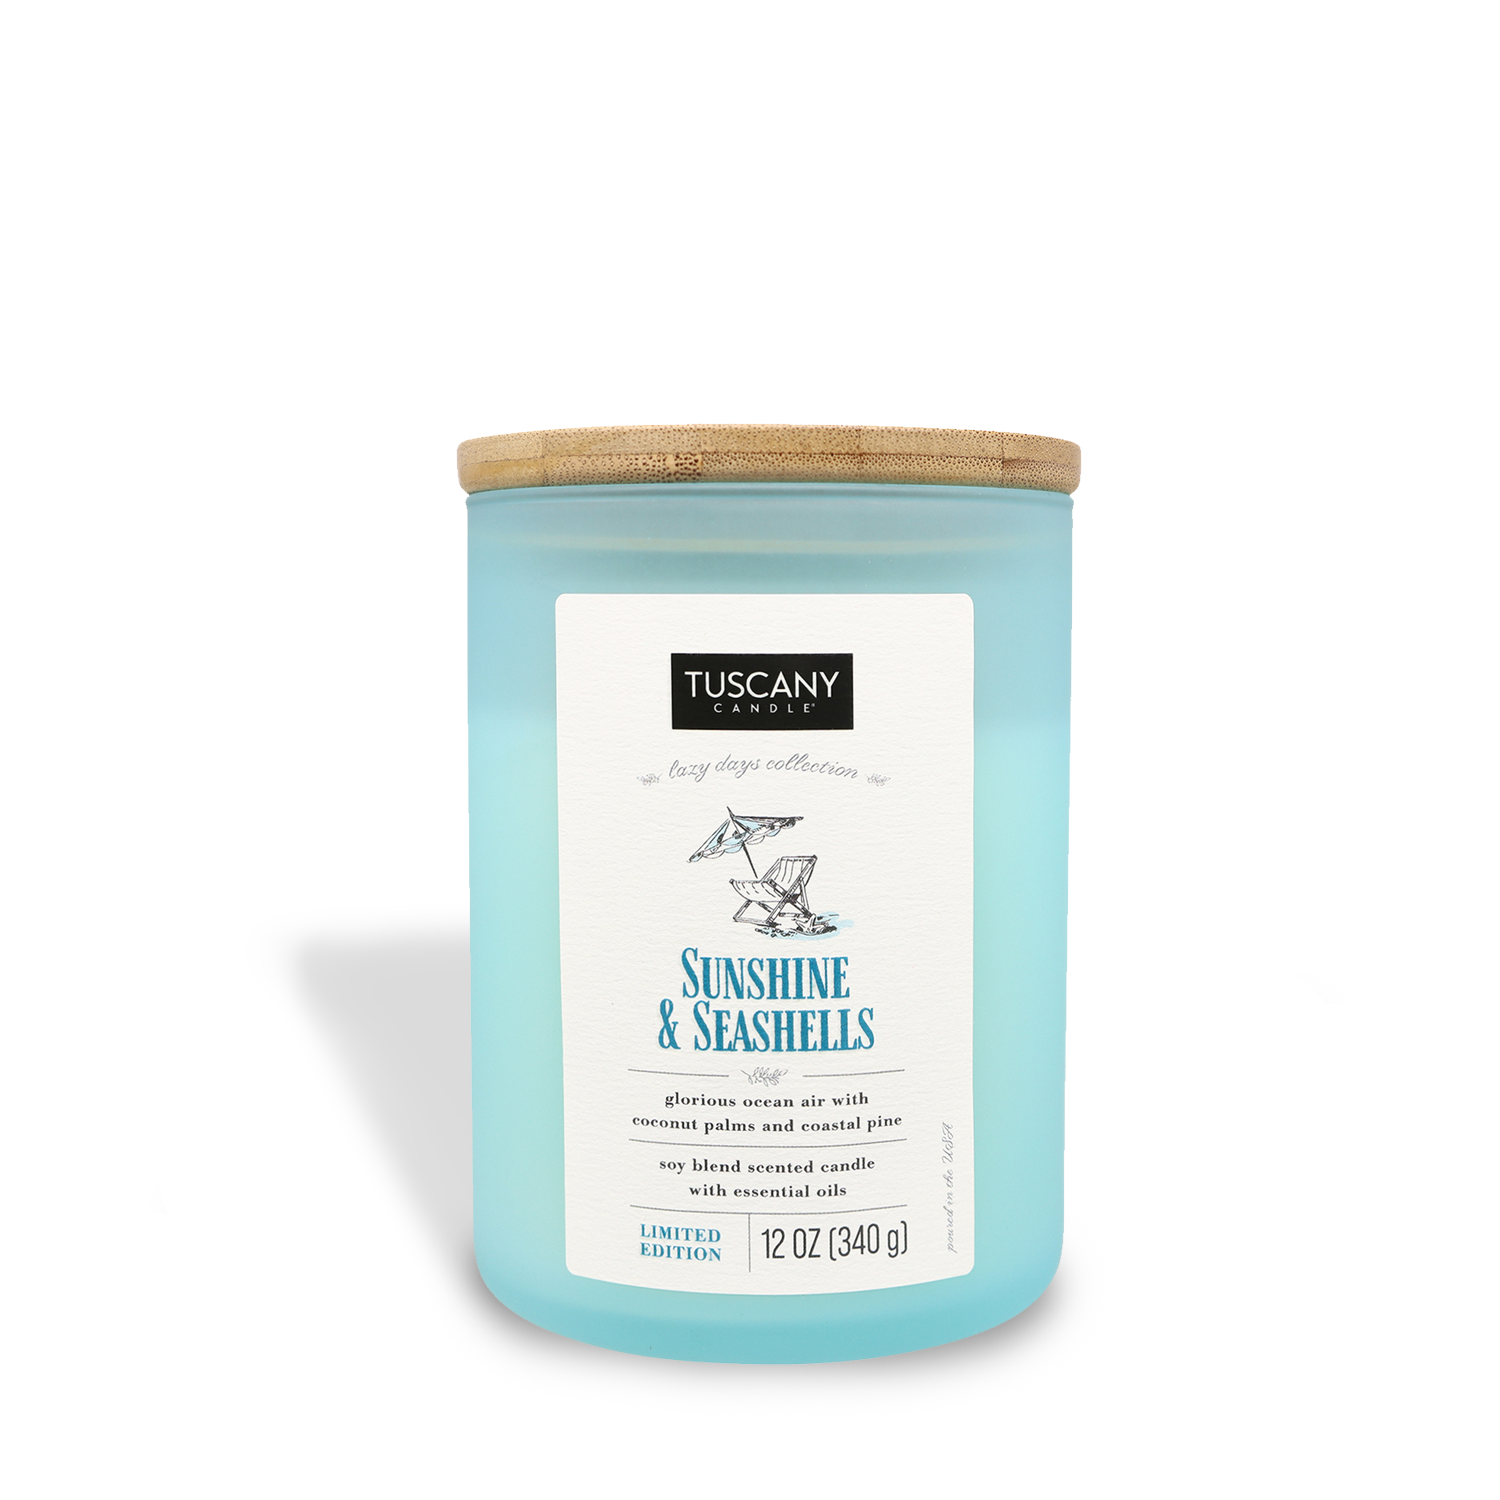 A limited edition Tuscany Candle® SEASONAL 'Sunshine & Seashells' (12 oz) from the Lazy Days Collection, presented in a 12-ounce jar.